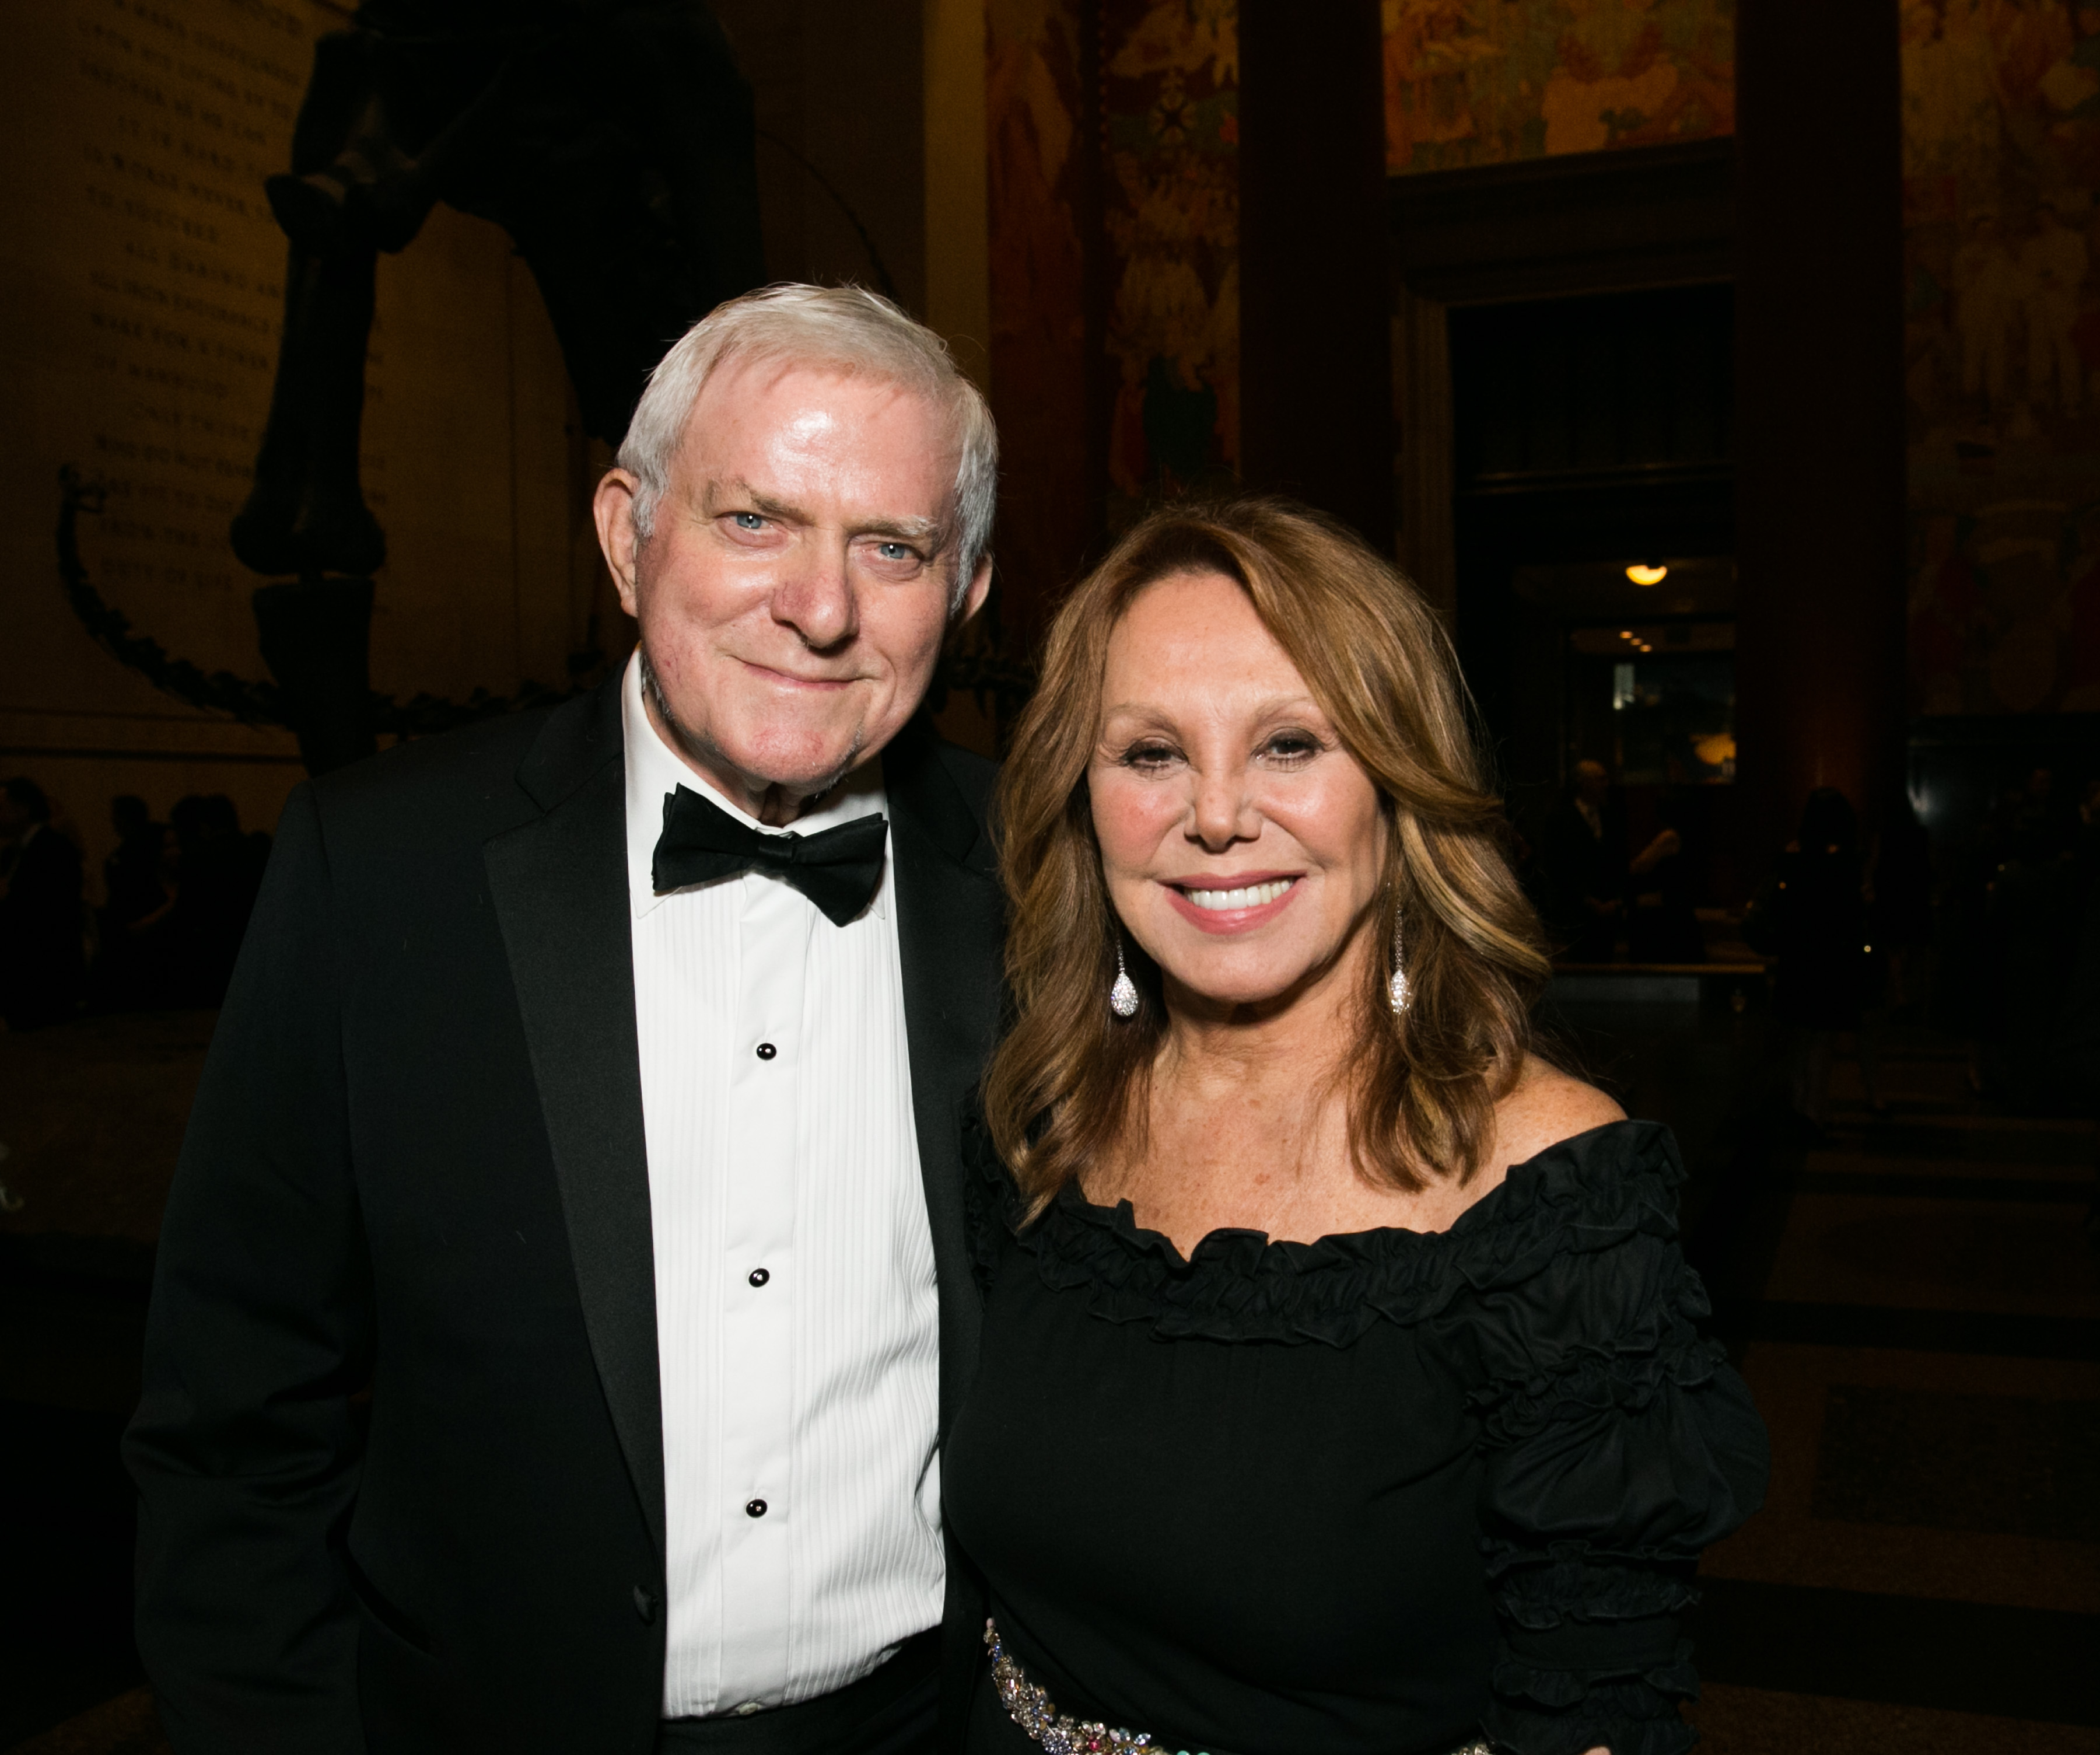 Phil Donahue and Marlo Thomas at the old Spring Harbor Laboratory's Double Helix Medals on December 1, 2016, in New York City | Source: Getty Images